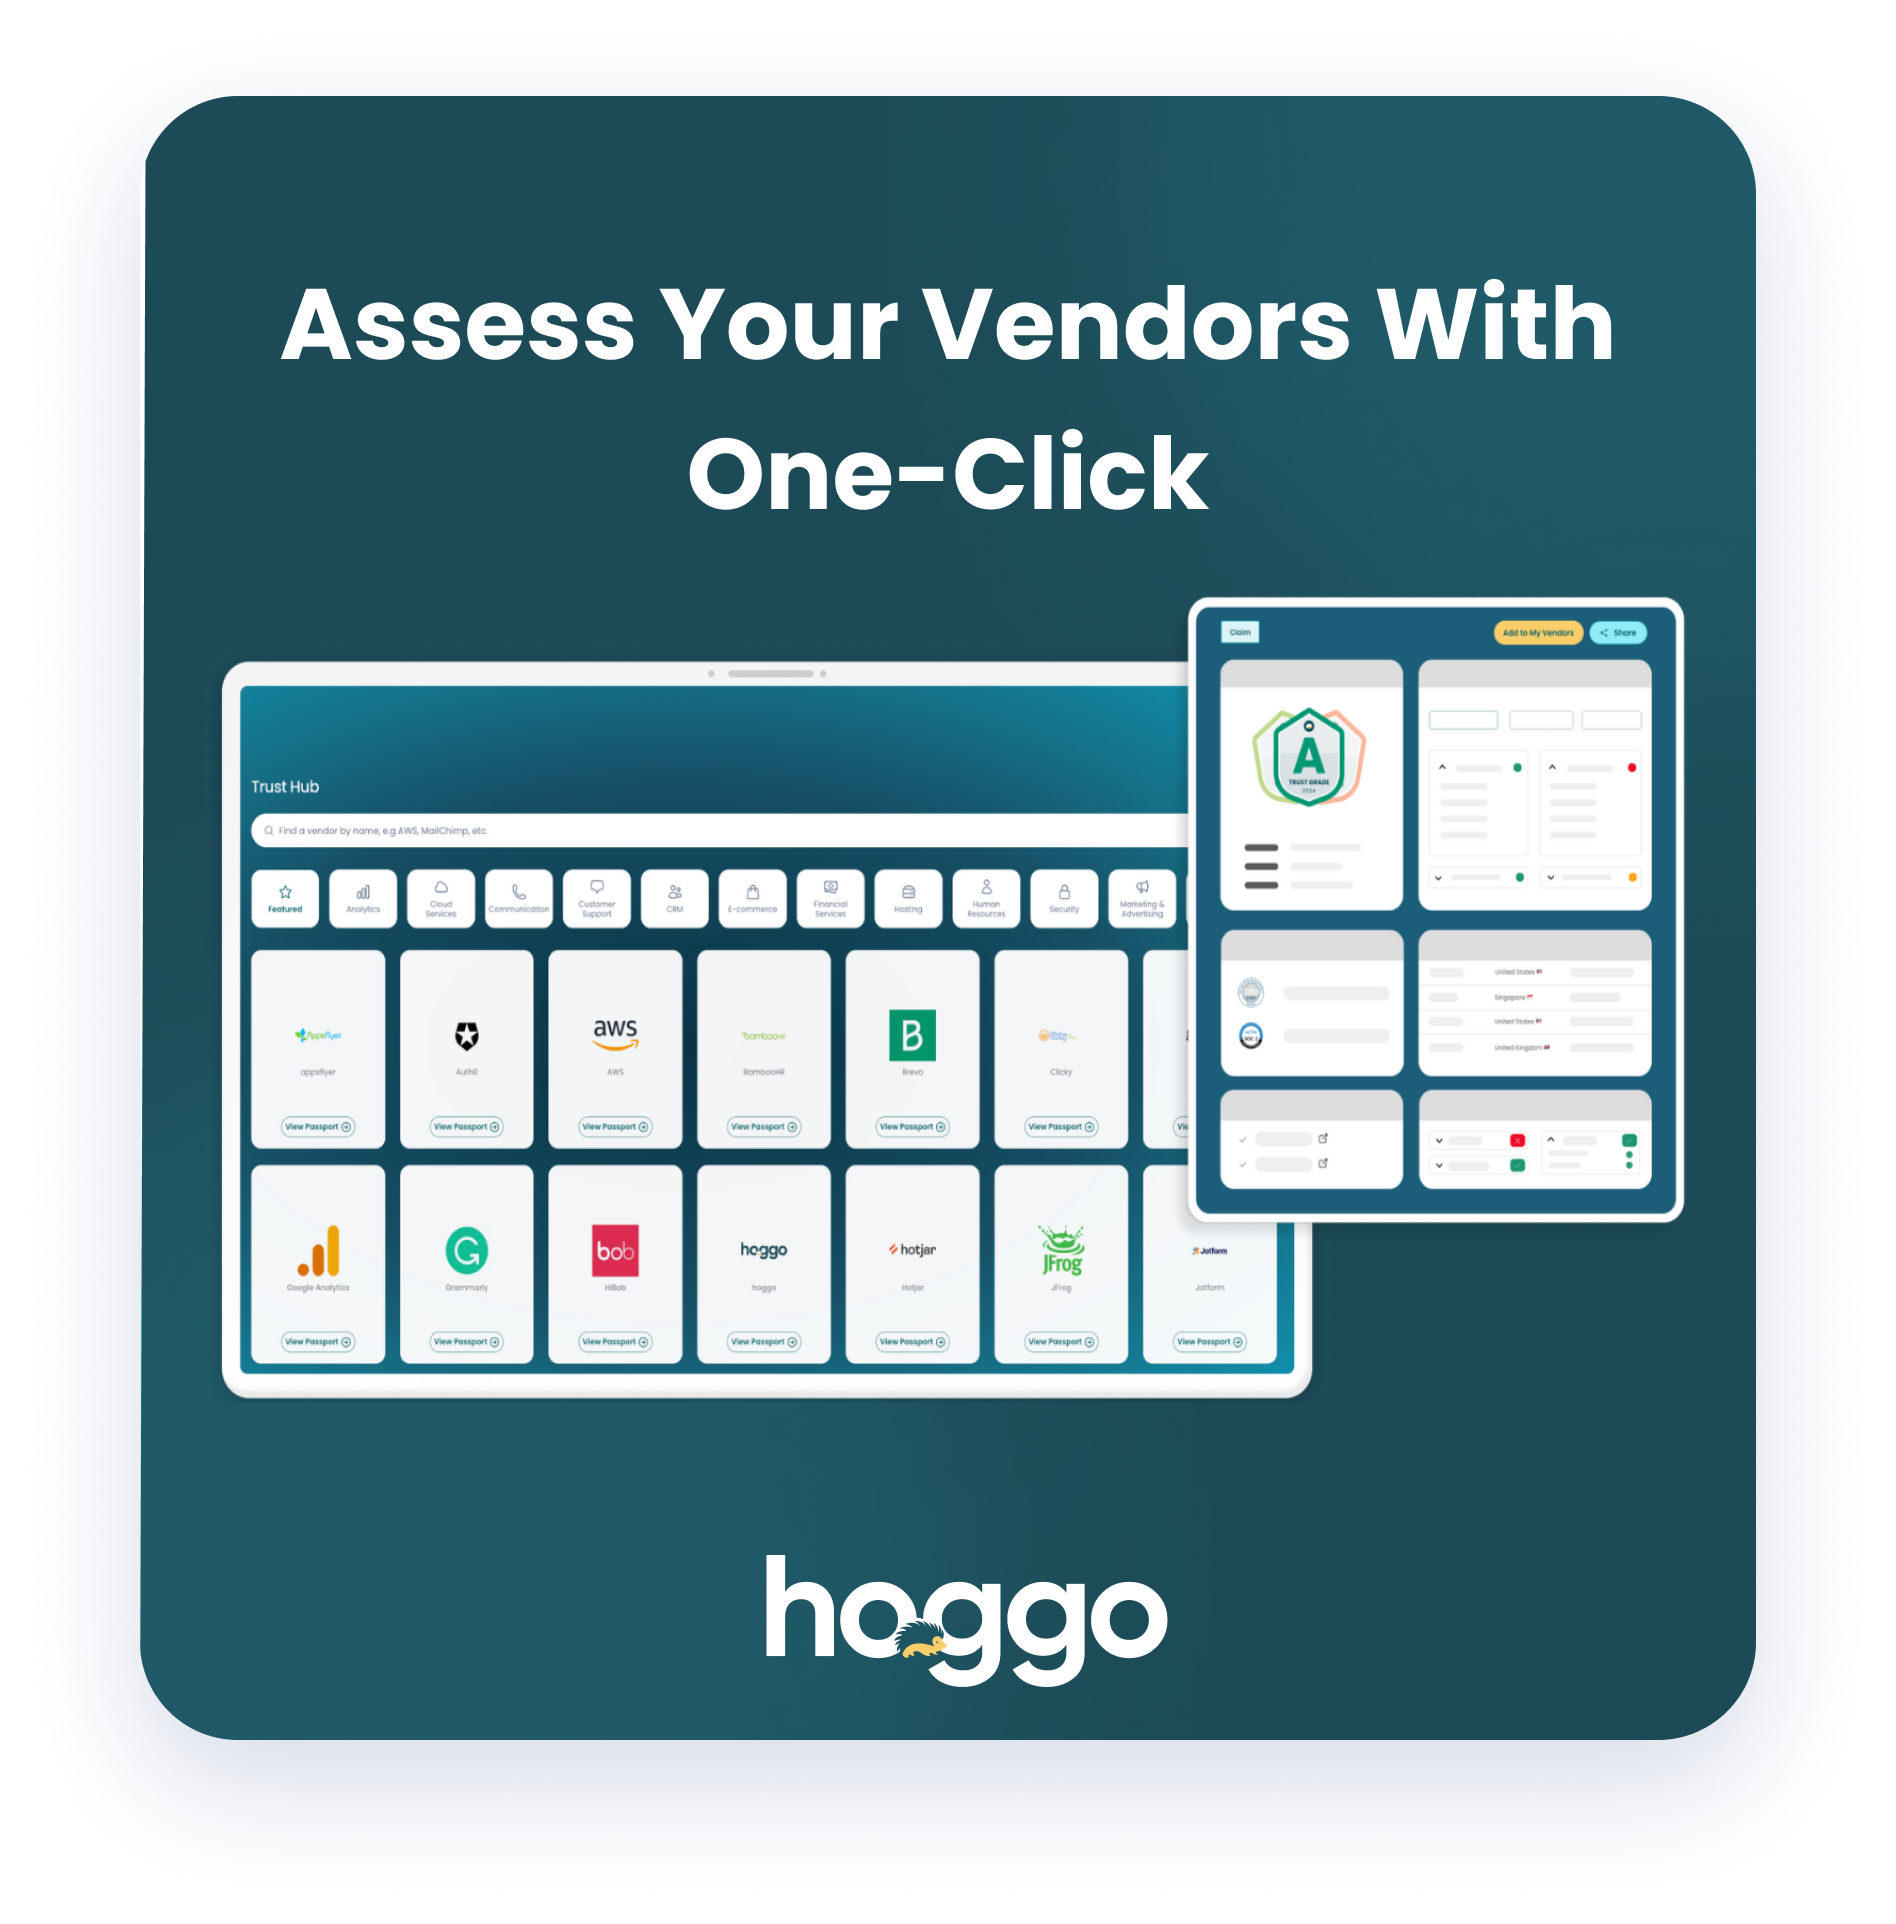 hoggo assess your vendors with one-click banner